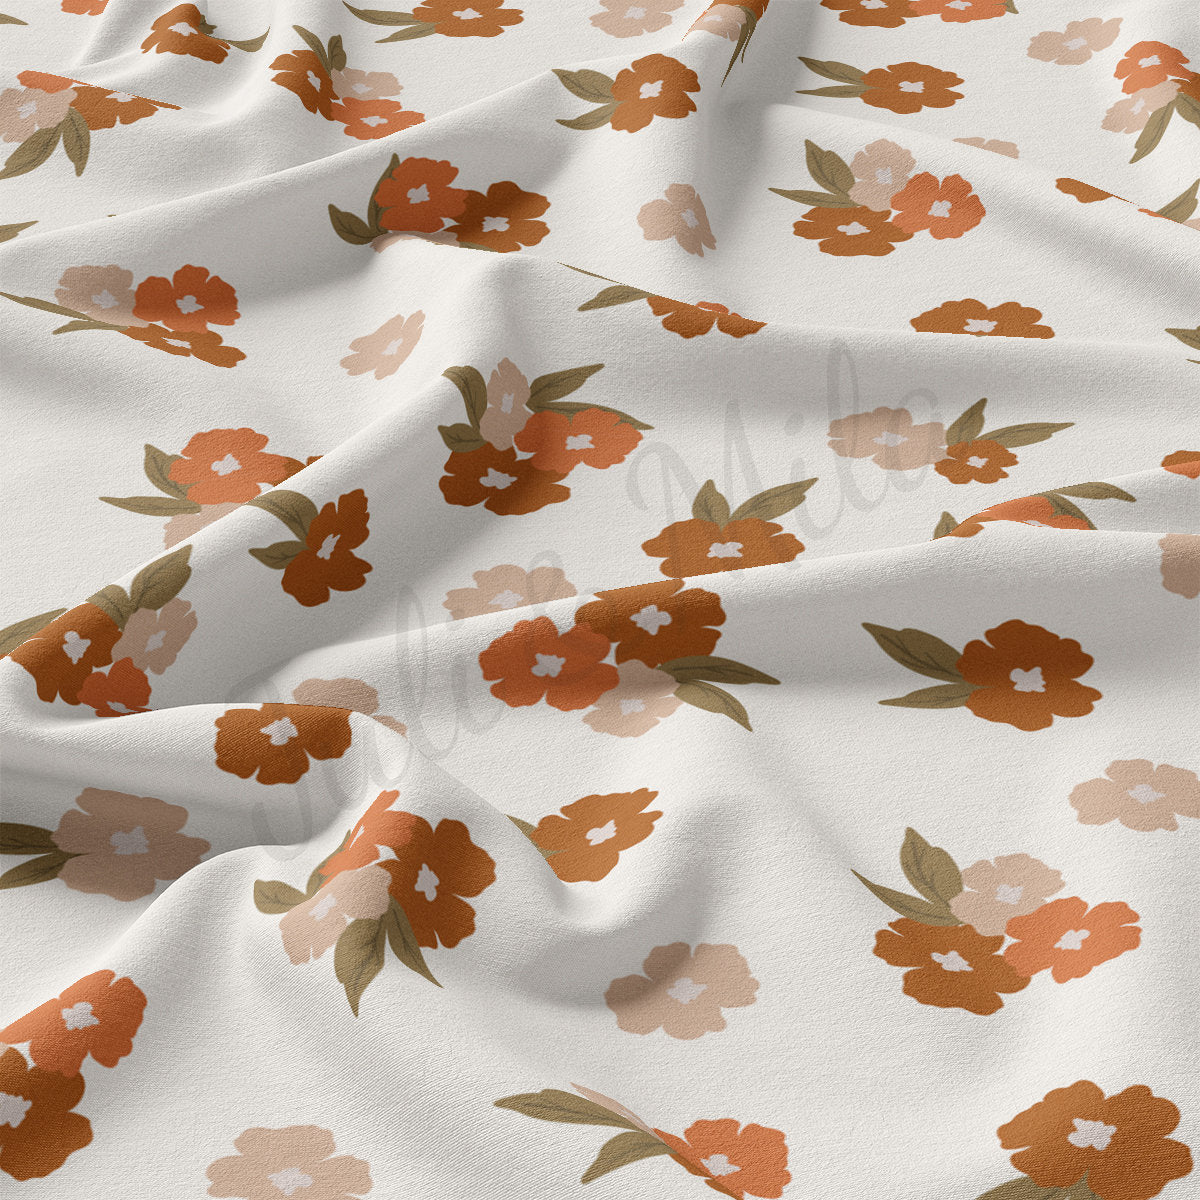 Floral DBP Fabric Double Brushed Polyester Fabric DBP2200